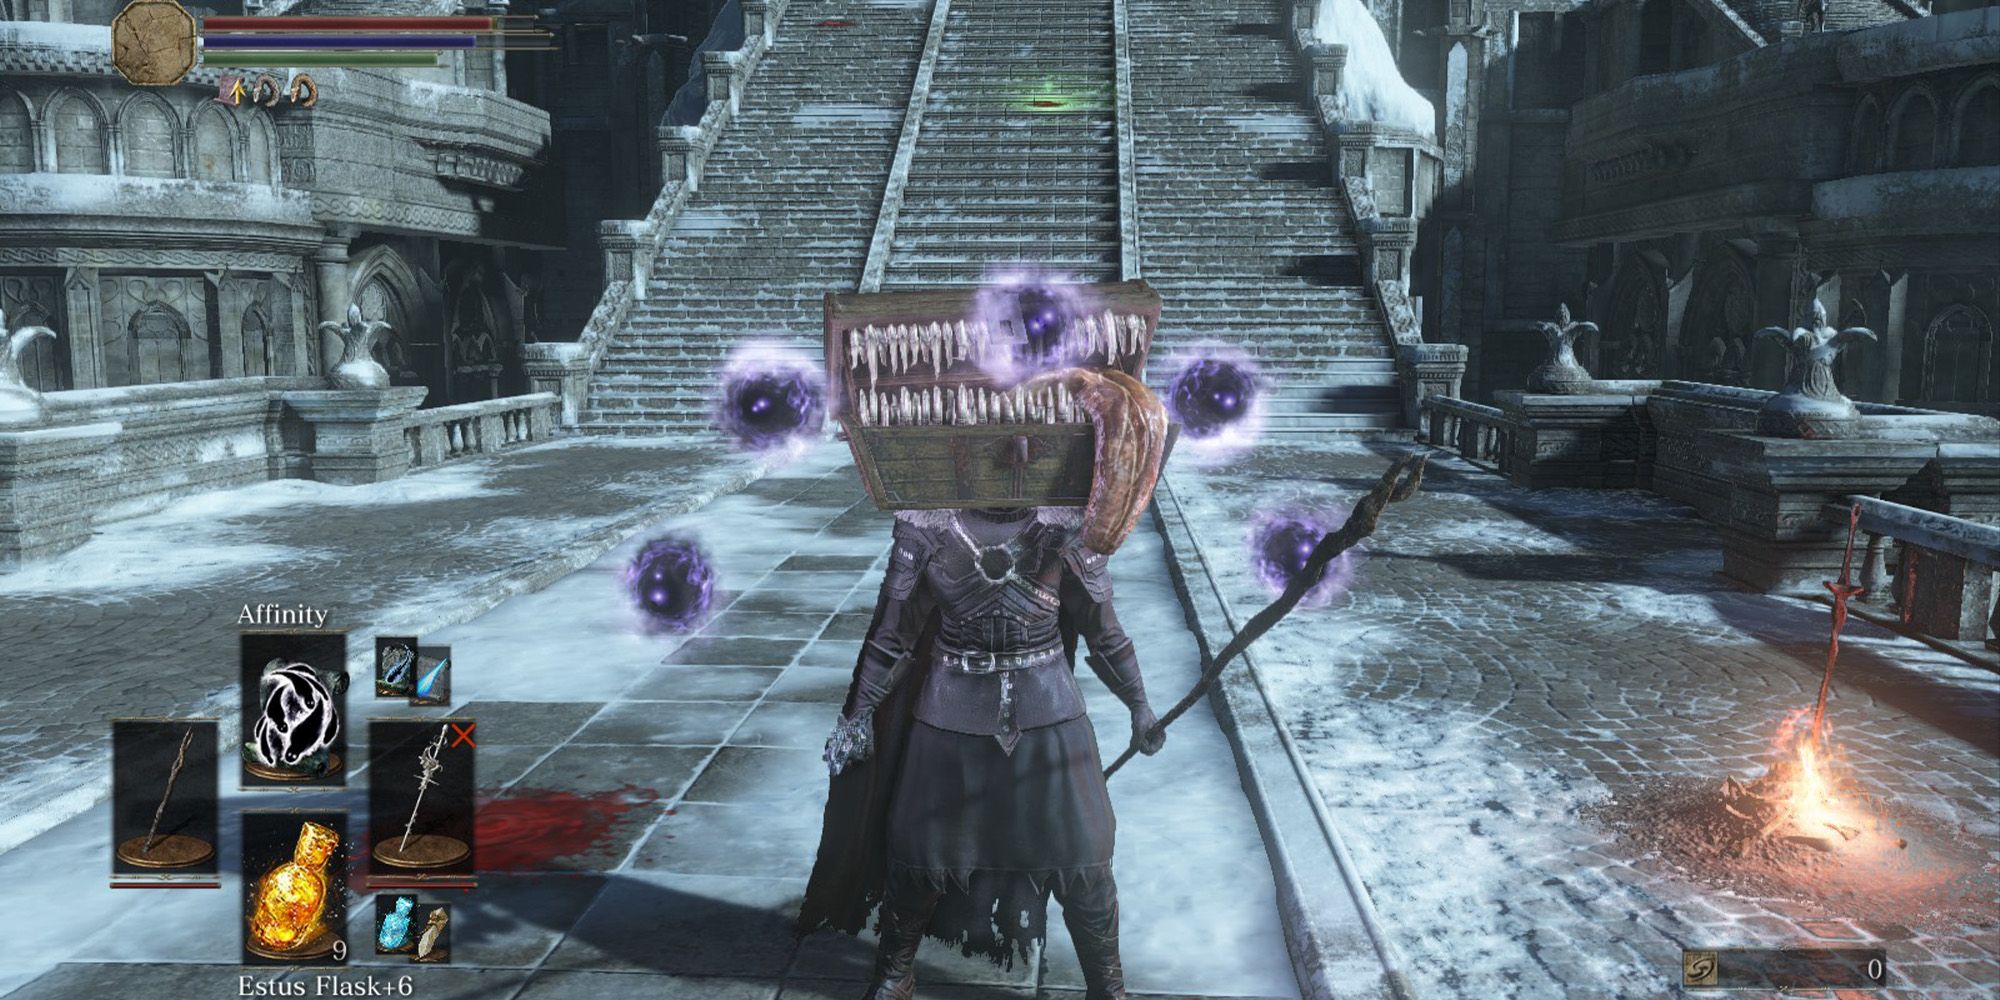 A player with the Symbol of Avarice, casting the Affinity spell while wearing the Drang Armor set in Anor Londo